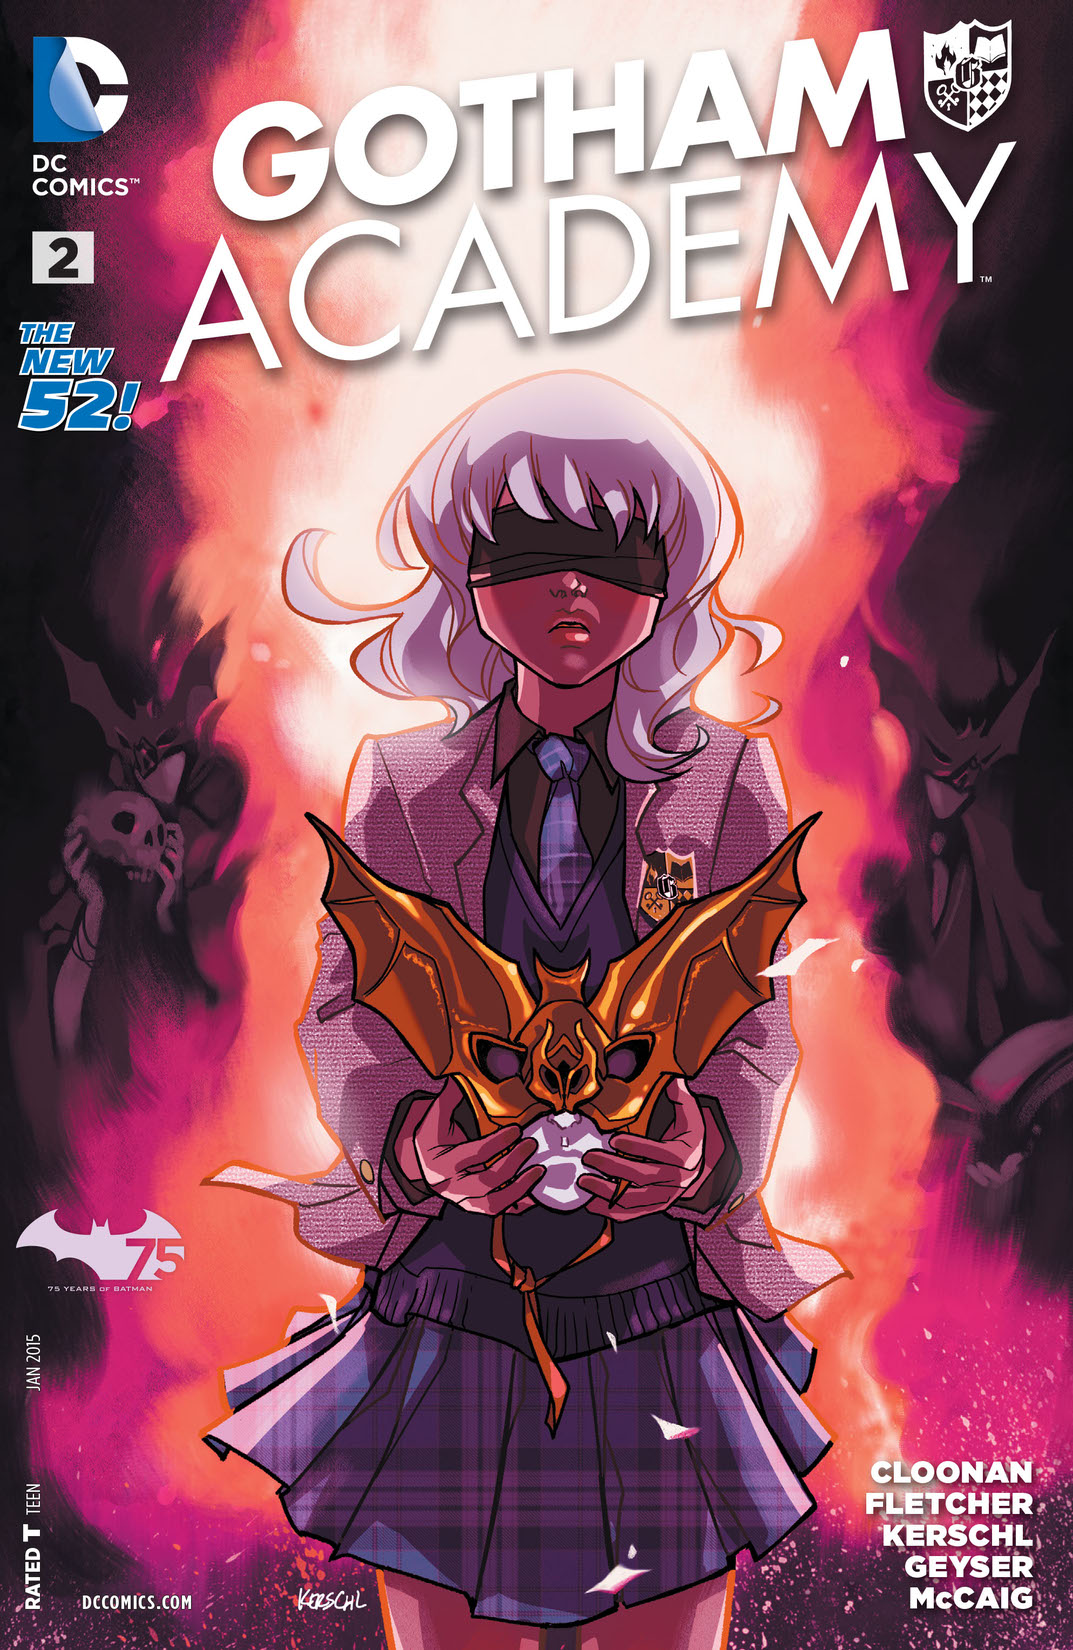 Gotham Academy #2 preview images